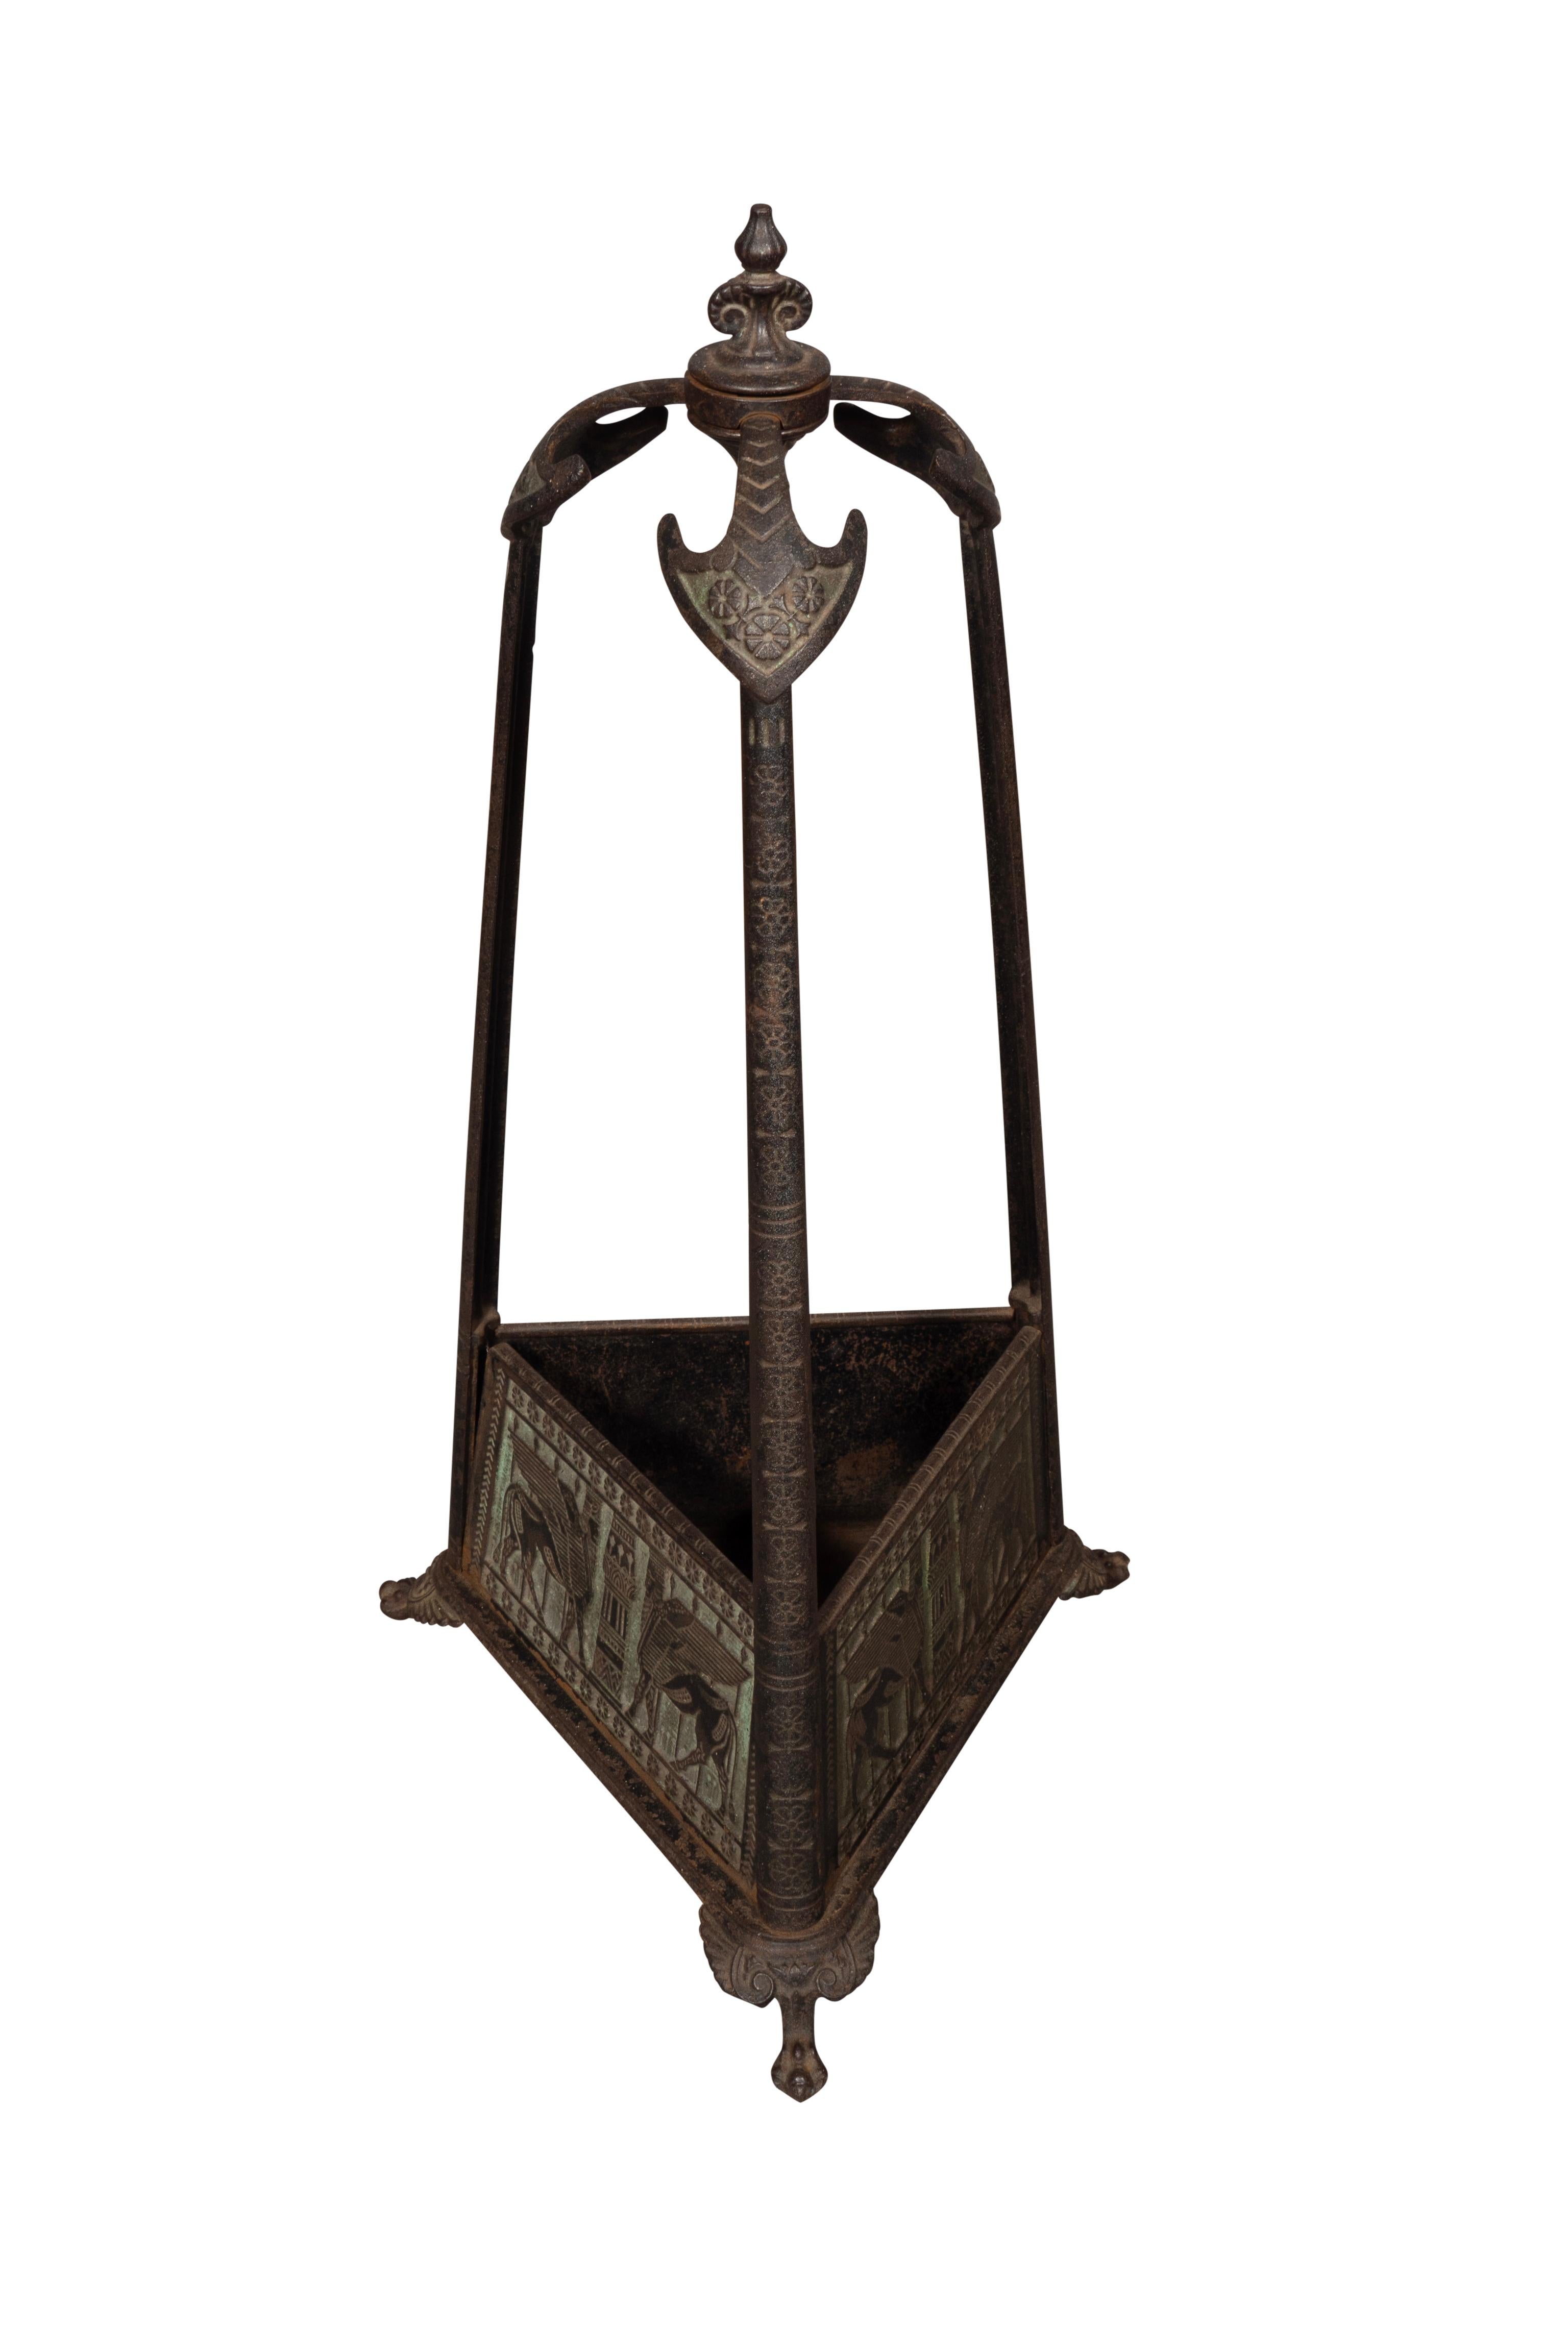 Assyrian Revival Cast Iron Tool Holder With Four Renaissance Revival Firetools For Sale 3